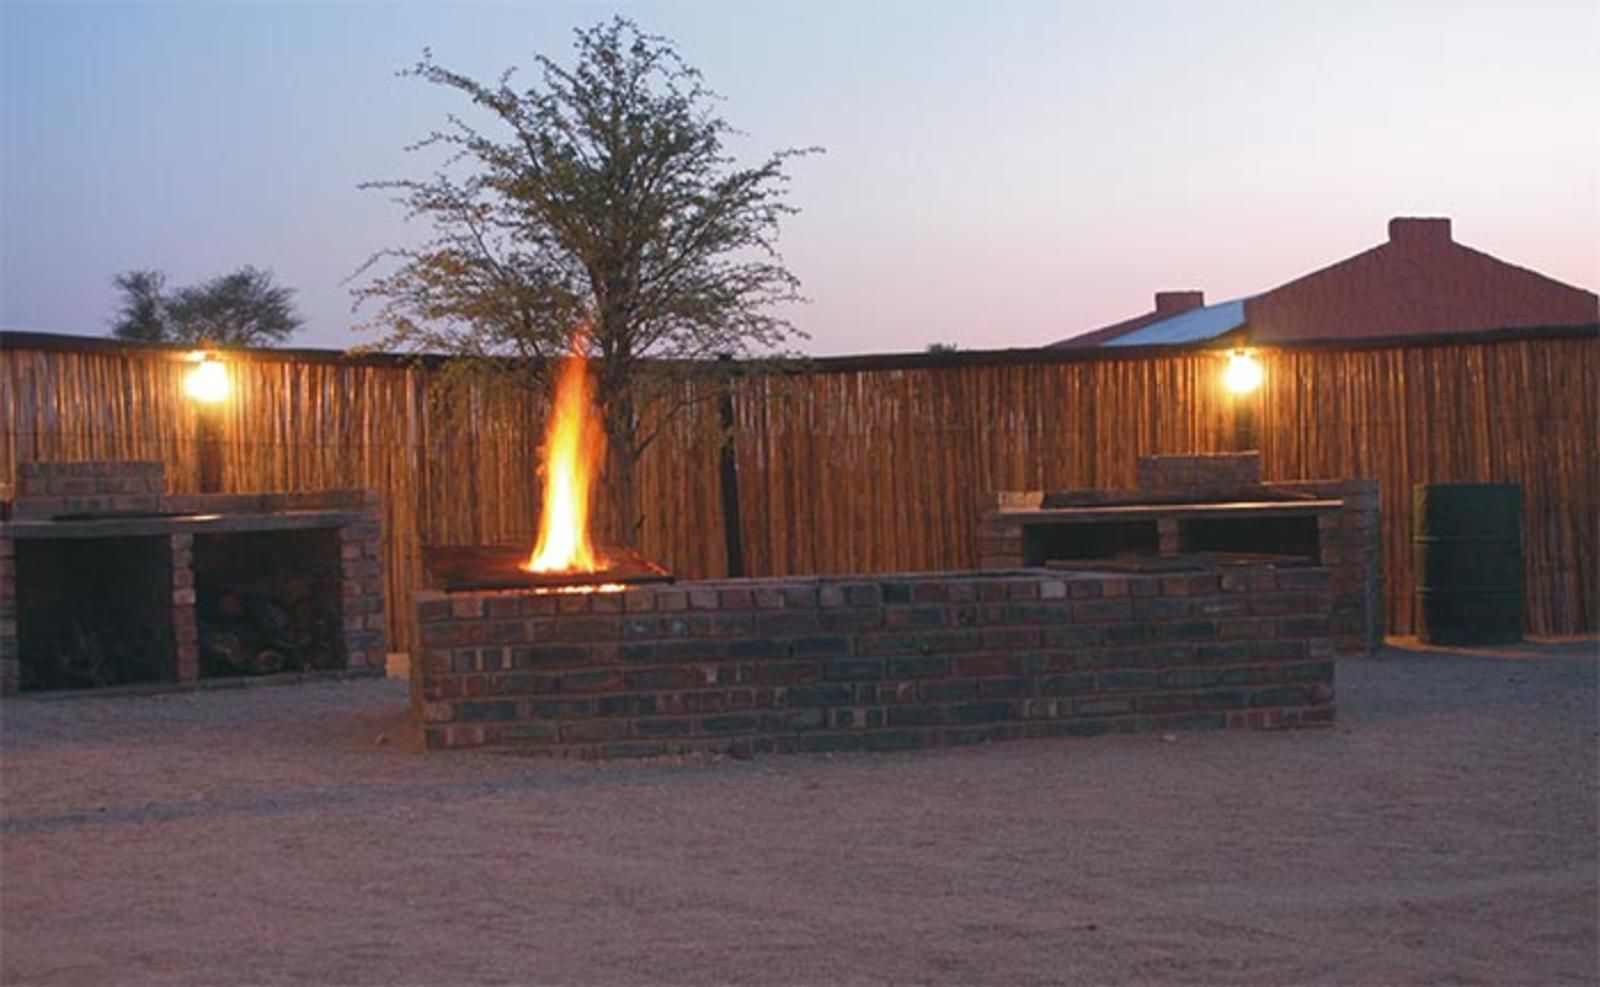 Loch Maree Guest Farm And Field Camp Upington Northern Cape South Africa Fire, Nature